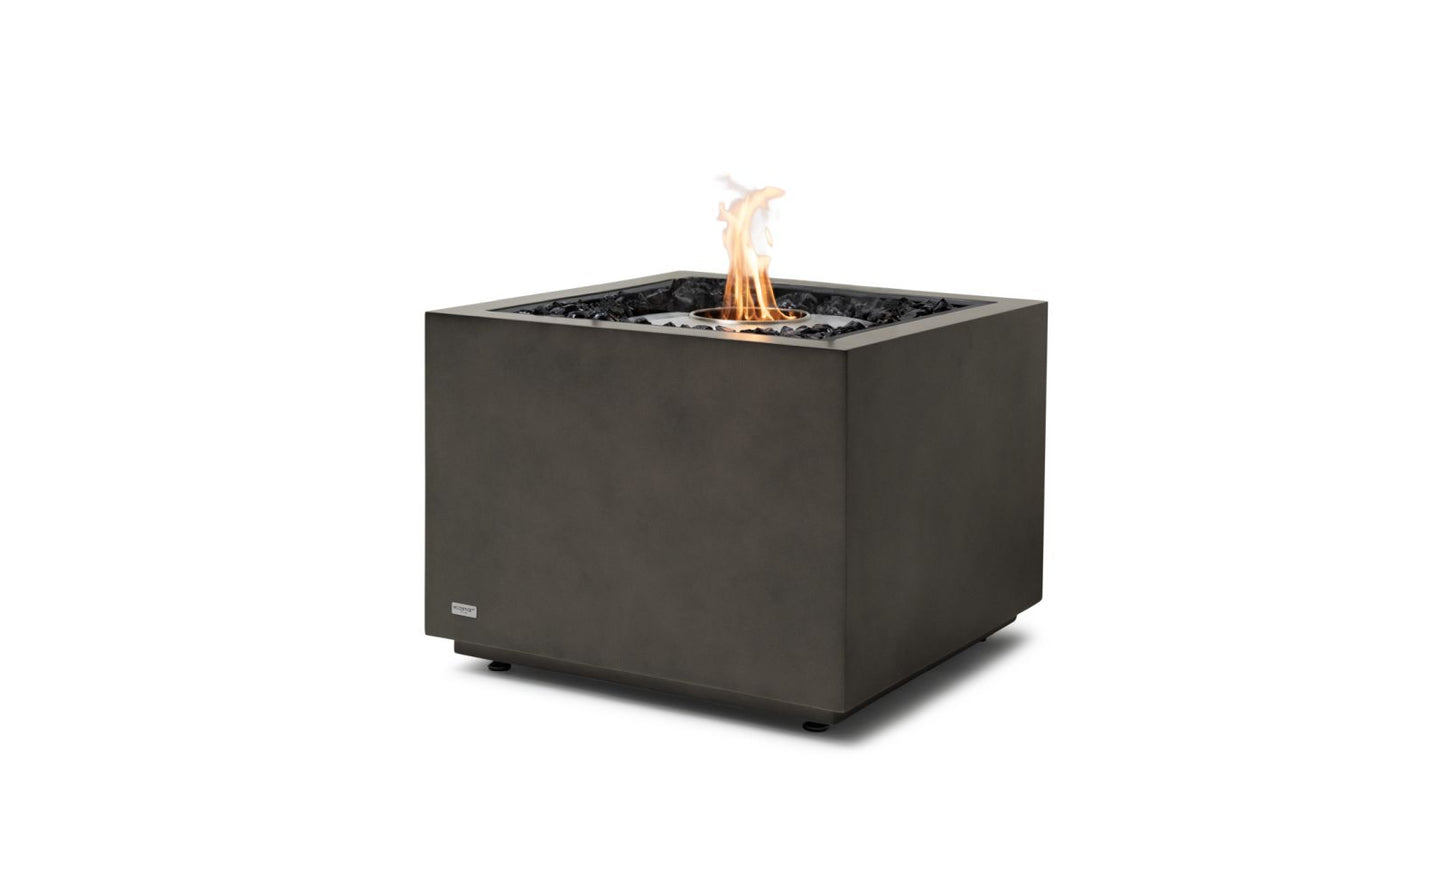 EcoSmart Fire - Sidecar 24 - Gas Fire Pit Table - Natural